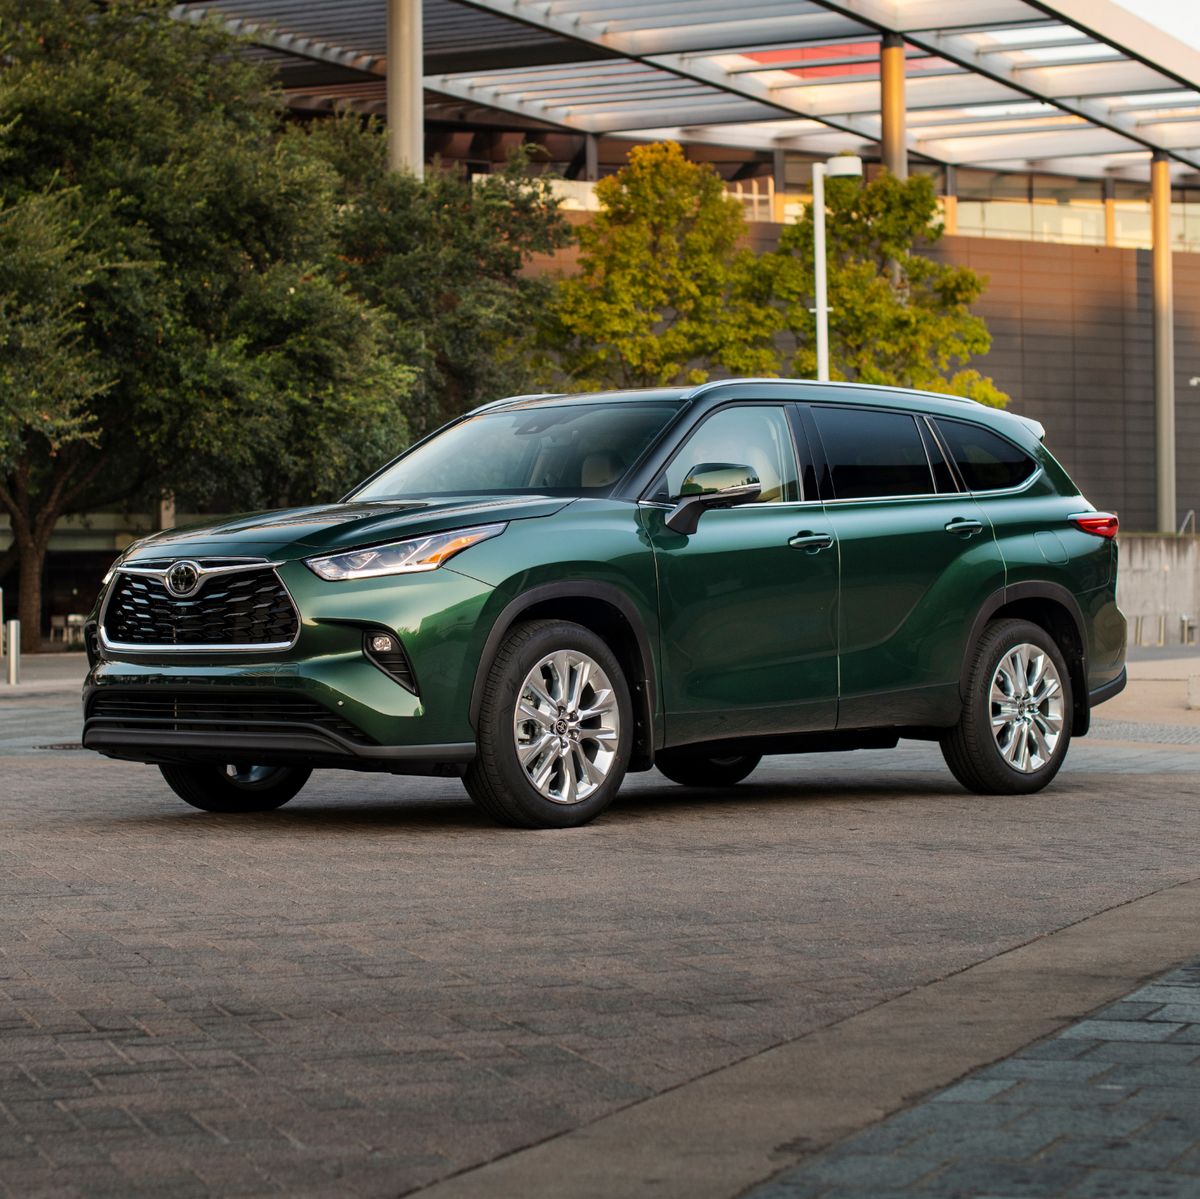 The Future of SUVs: A Sneak Peek into the High-Tech Features of the 2023 Toyota Highlander Hybrid - Efficient hybrid powertrain and improved fuel efficiency